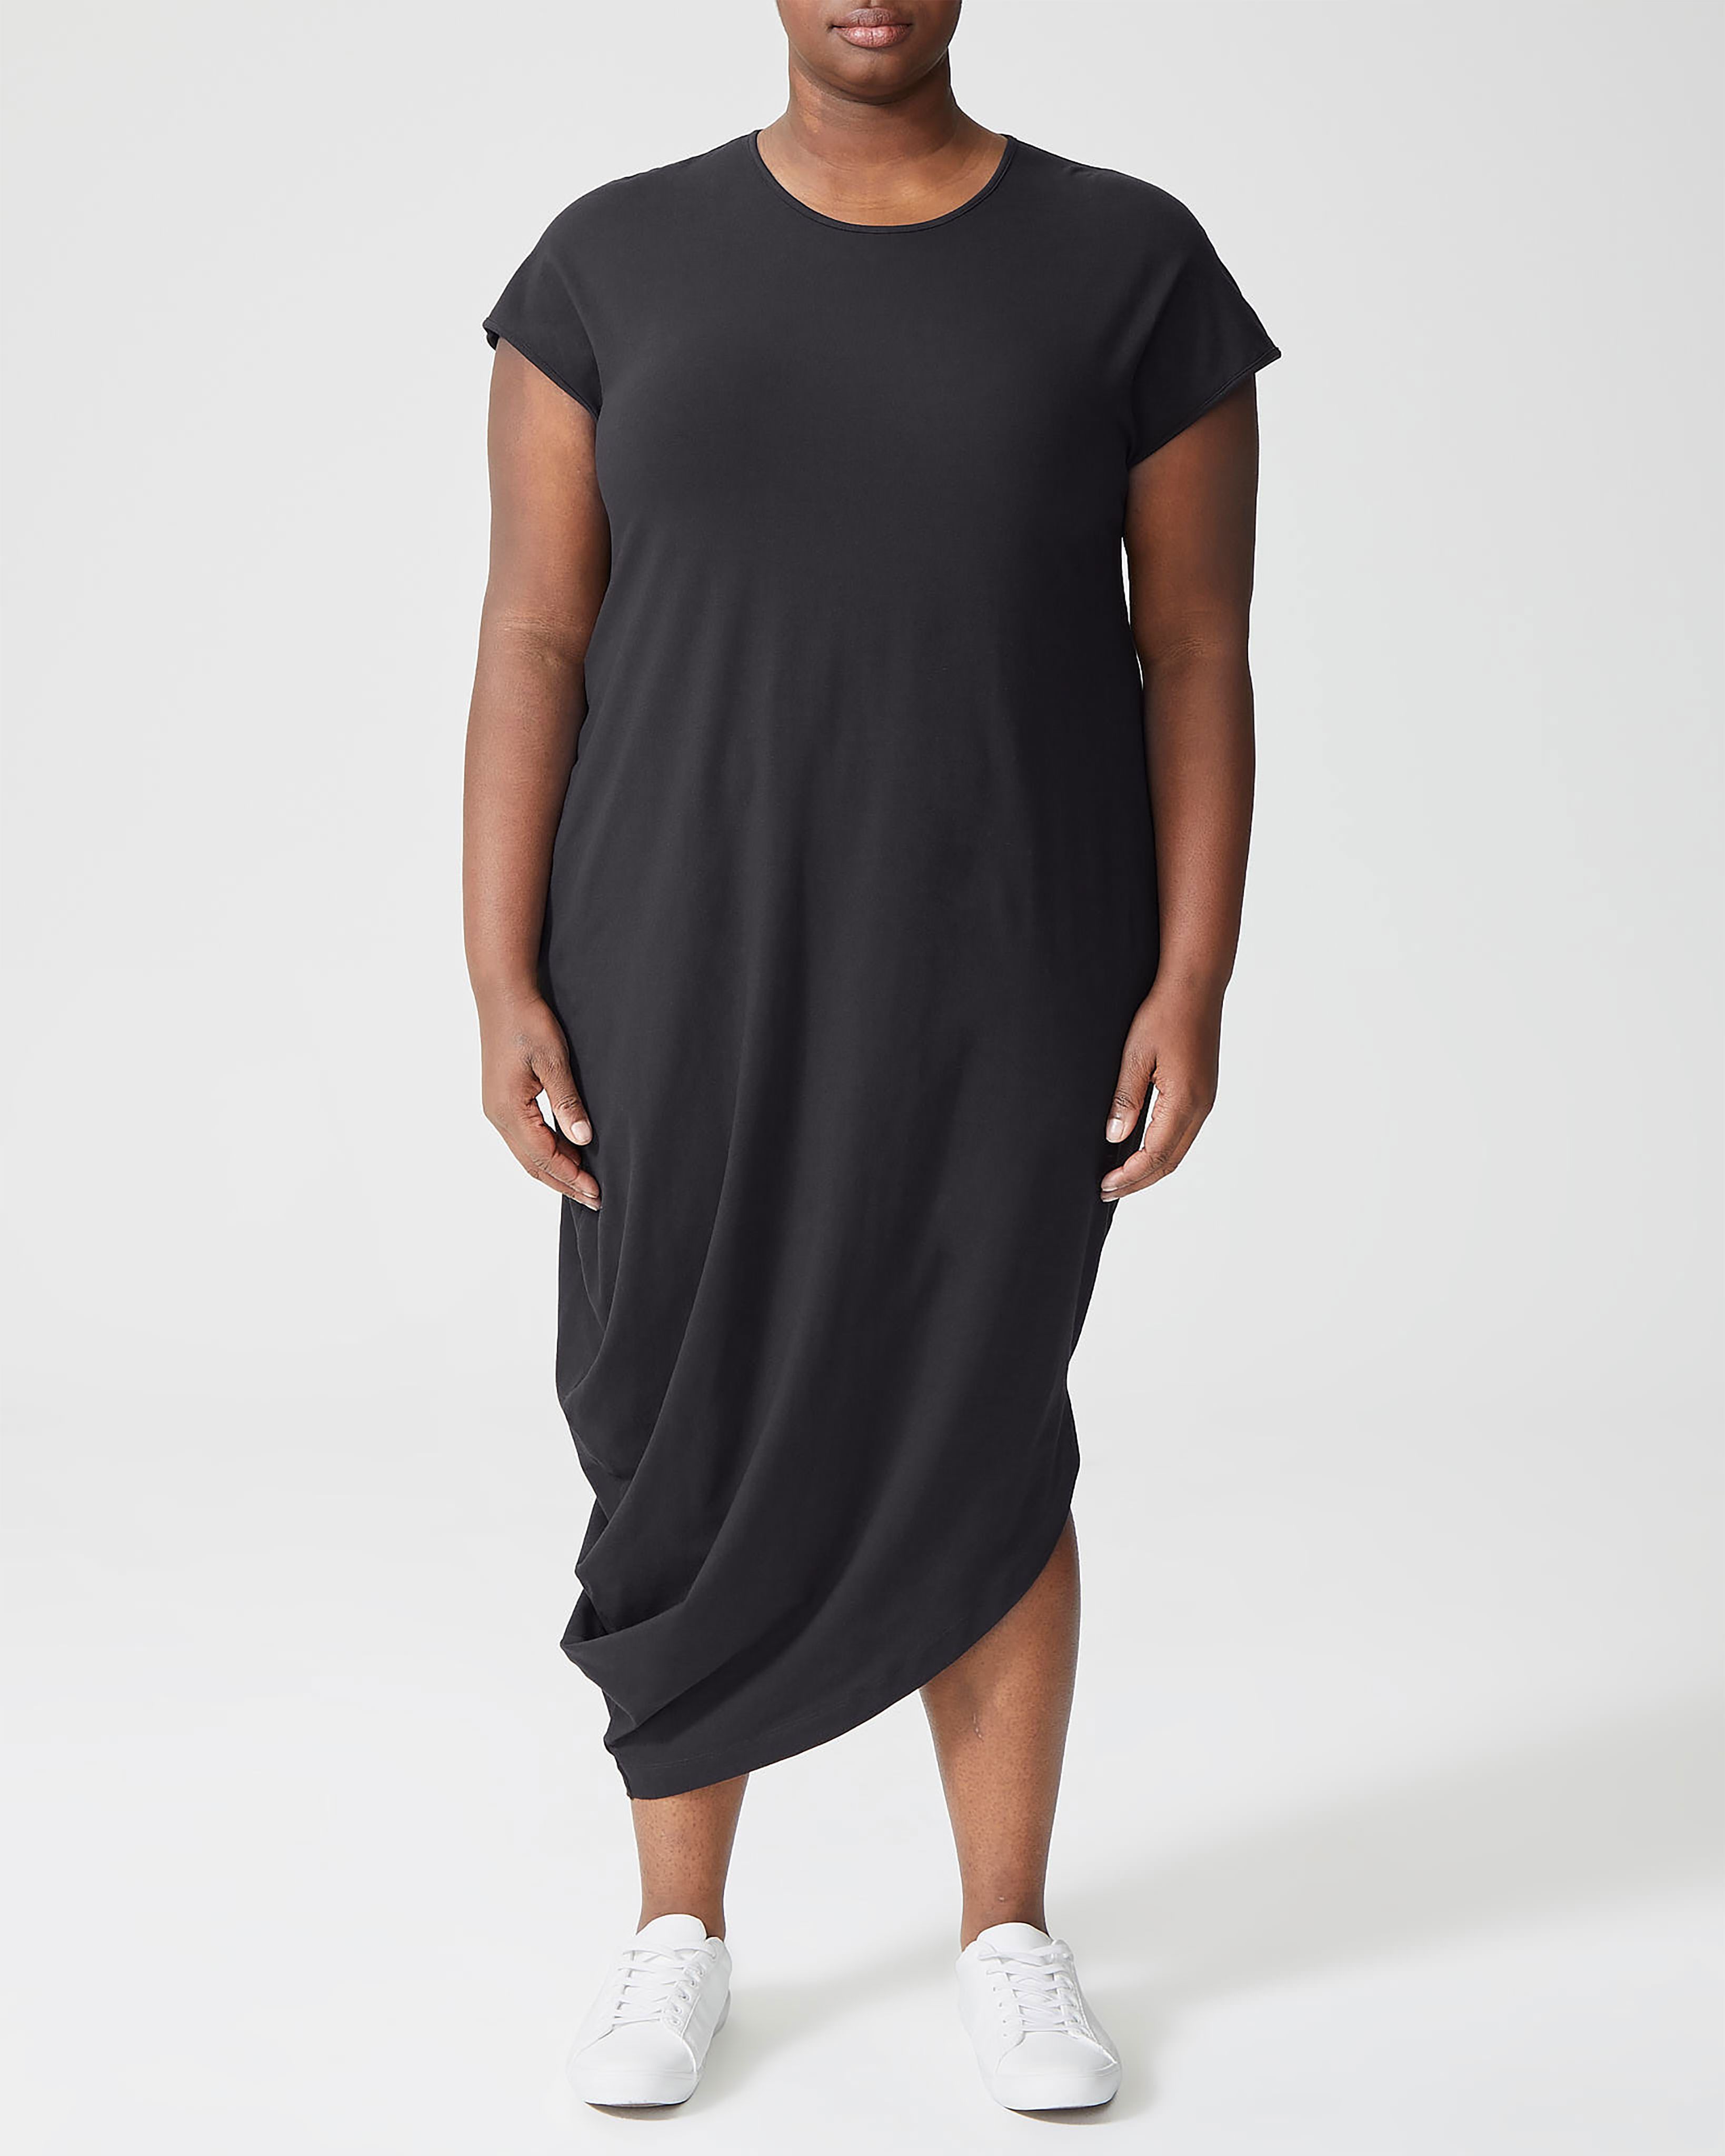 9 Plus-Size and Size-Inclusive Clothing Brands to Shop Now